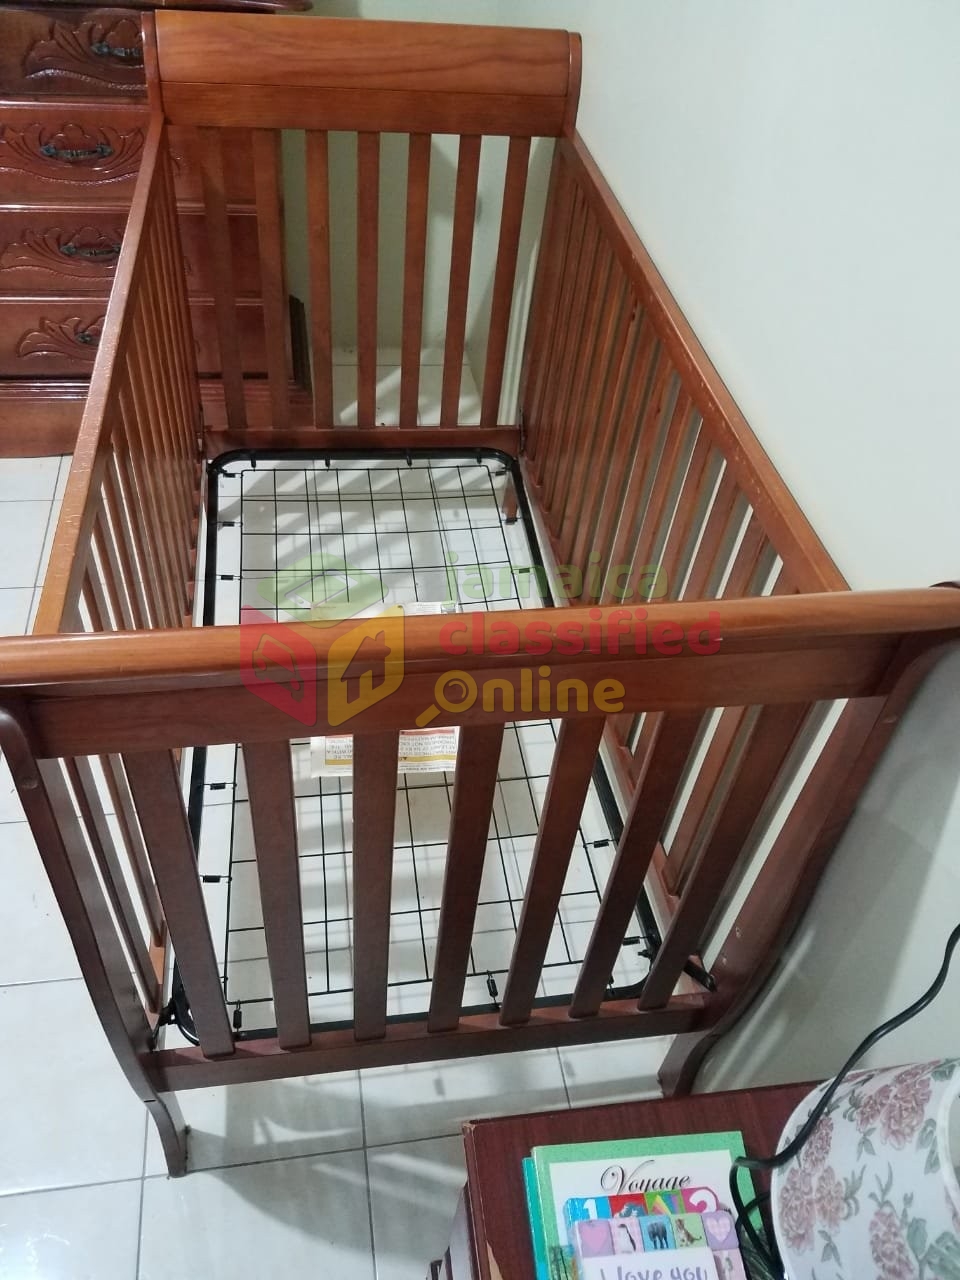 Baby Crib for sale in Mandeville Manchester - Baby